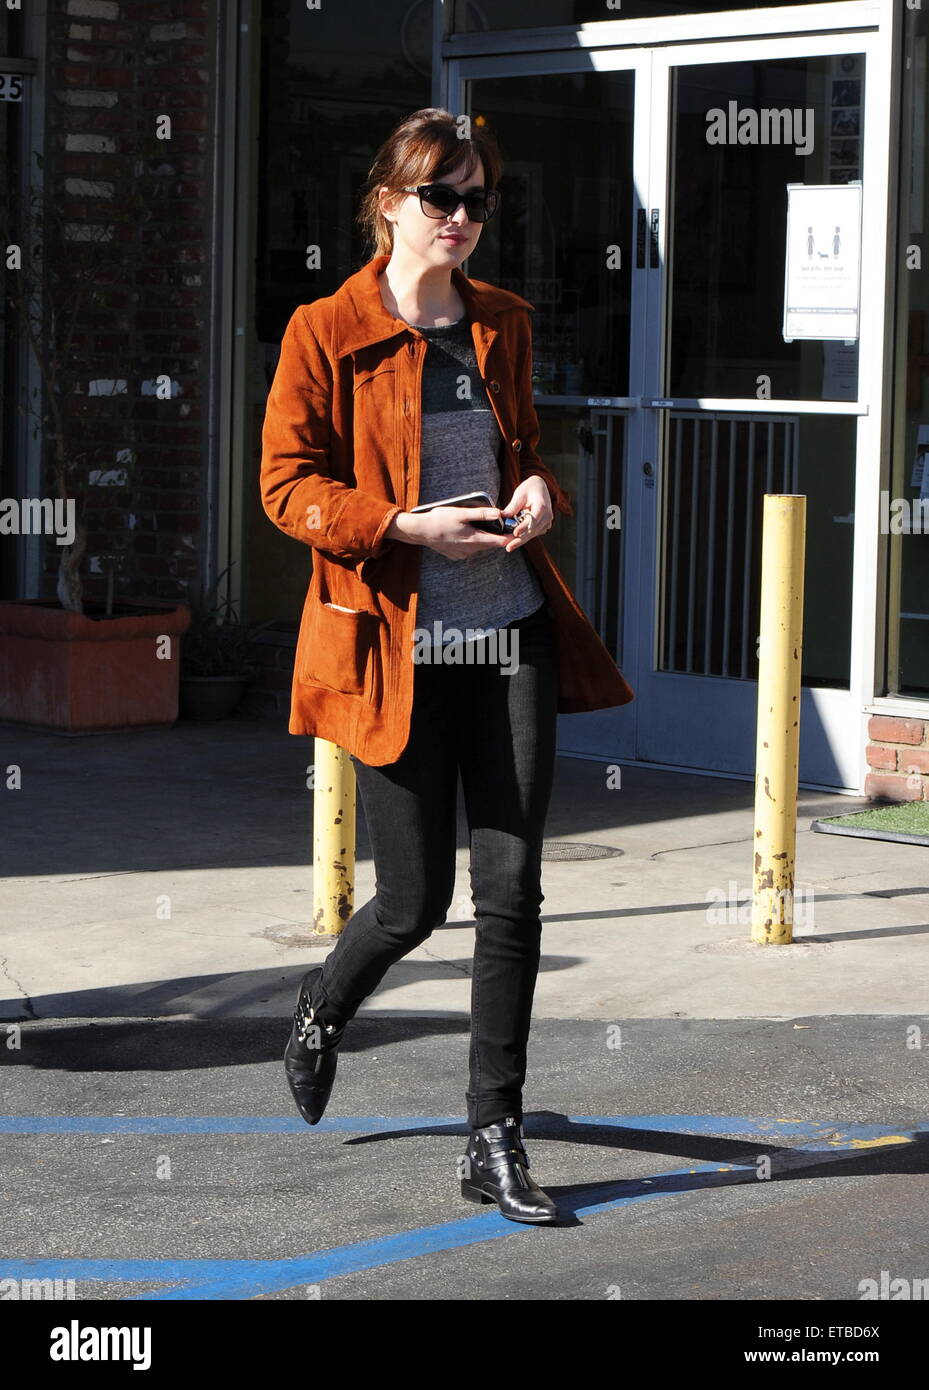 'Fifty Shades of Grey' star Dakota Johnson is all smiles after picking up her dry cleaning in Los Angeles. Afterwards, the actress headed out for lunch to Homestate cafe with a male friend  Featuring: Dakota Johnson Where: Los Angeles, California, United States When: 14 Jan 2015 Credit: Cousart/JFXimages/WENN.com Stock Photo